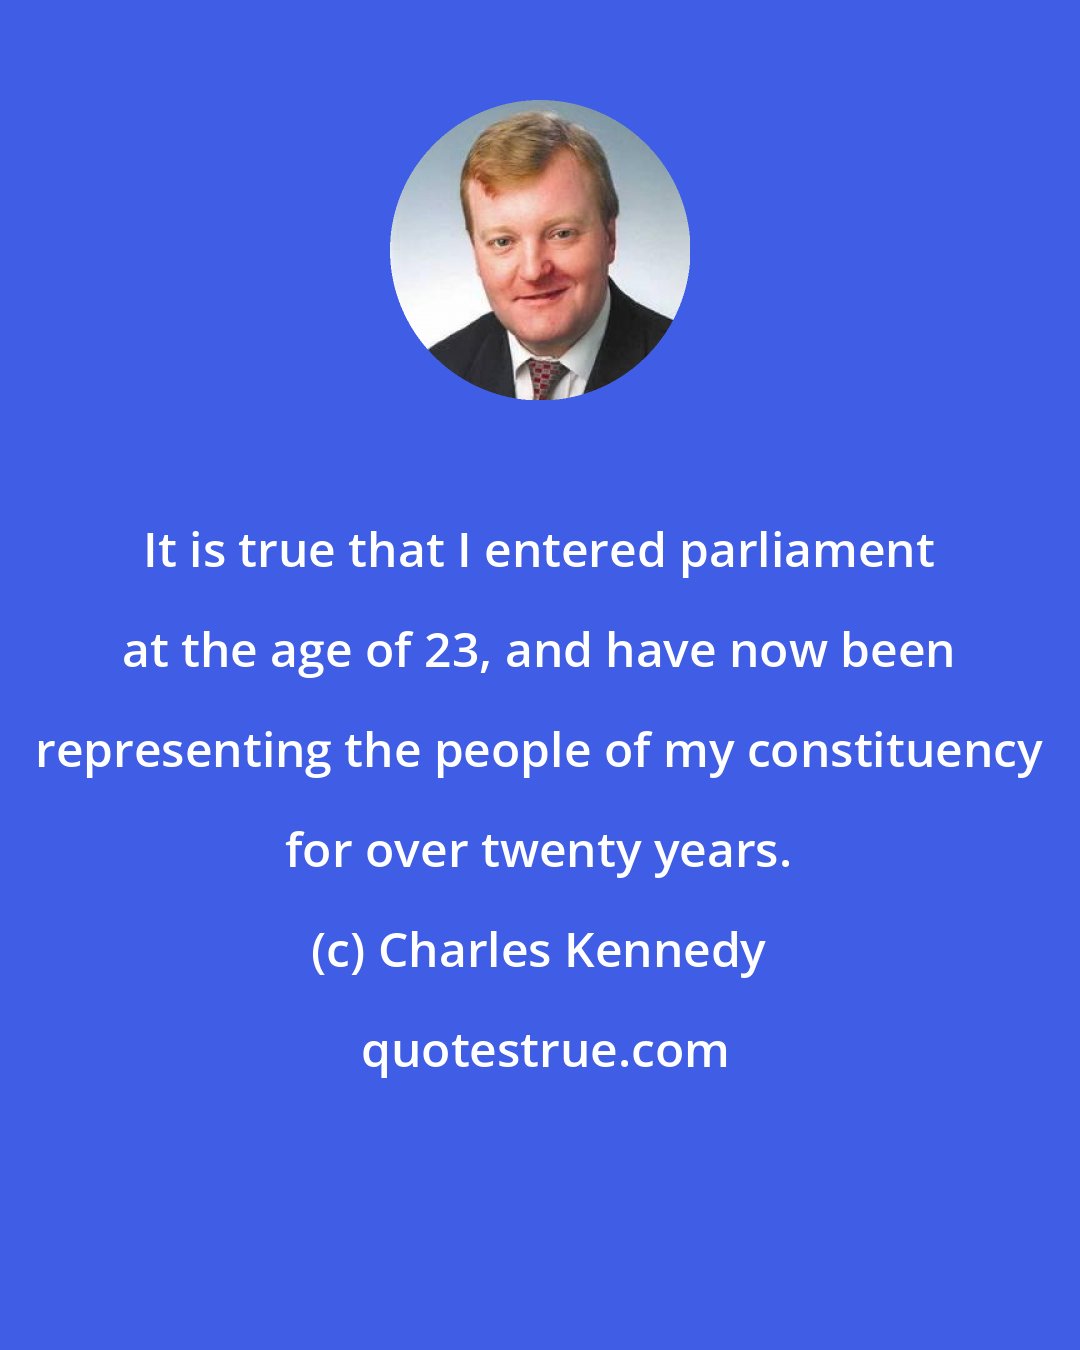 Charles Kennedy: It is true that I entered parliament at the age of 23, and have now been representing the people of my constituency for over twenty years.